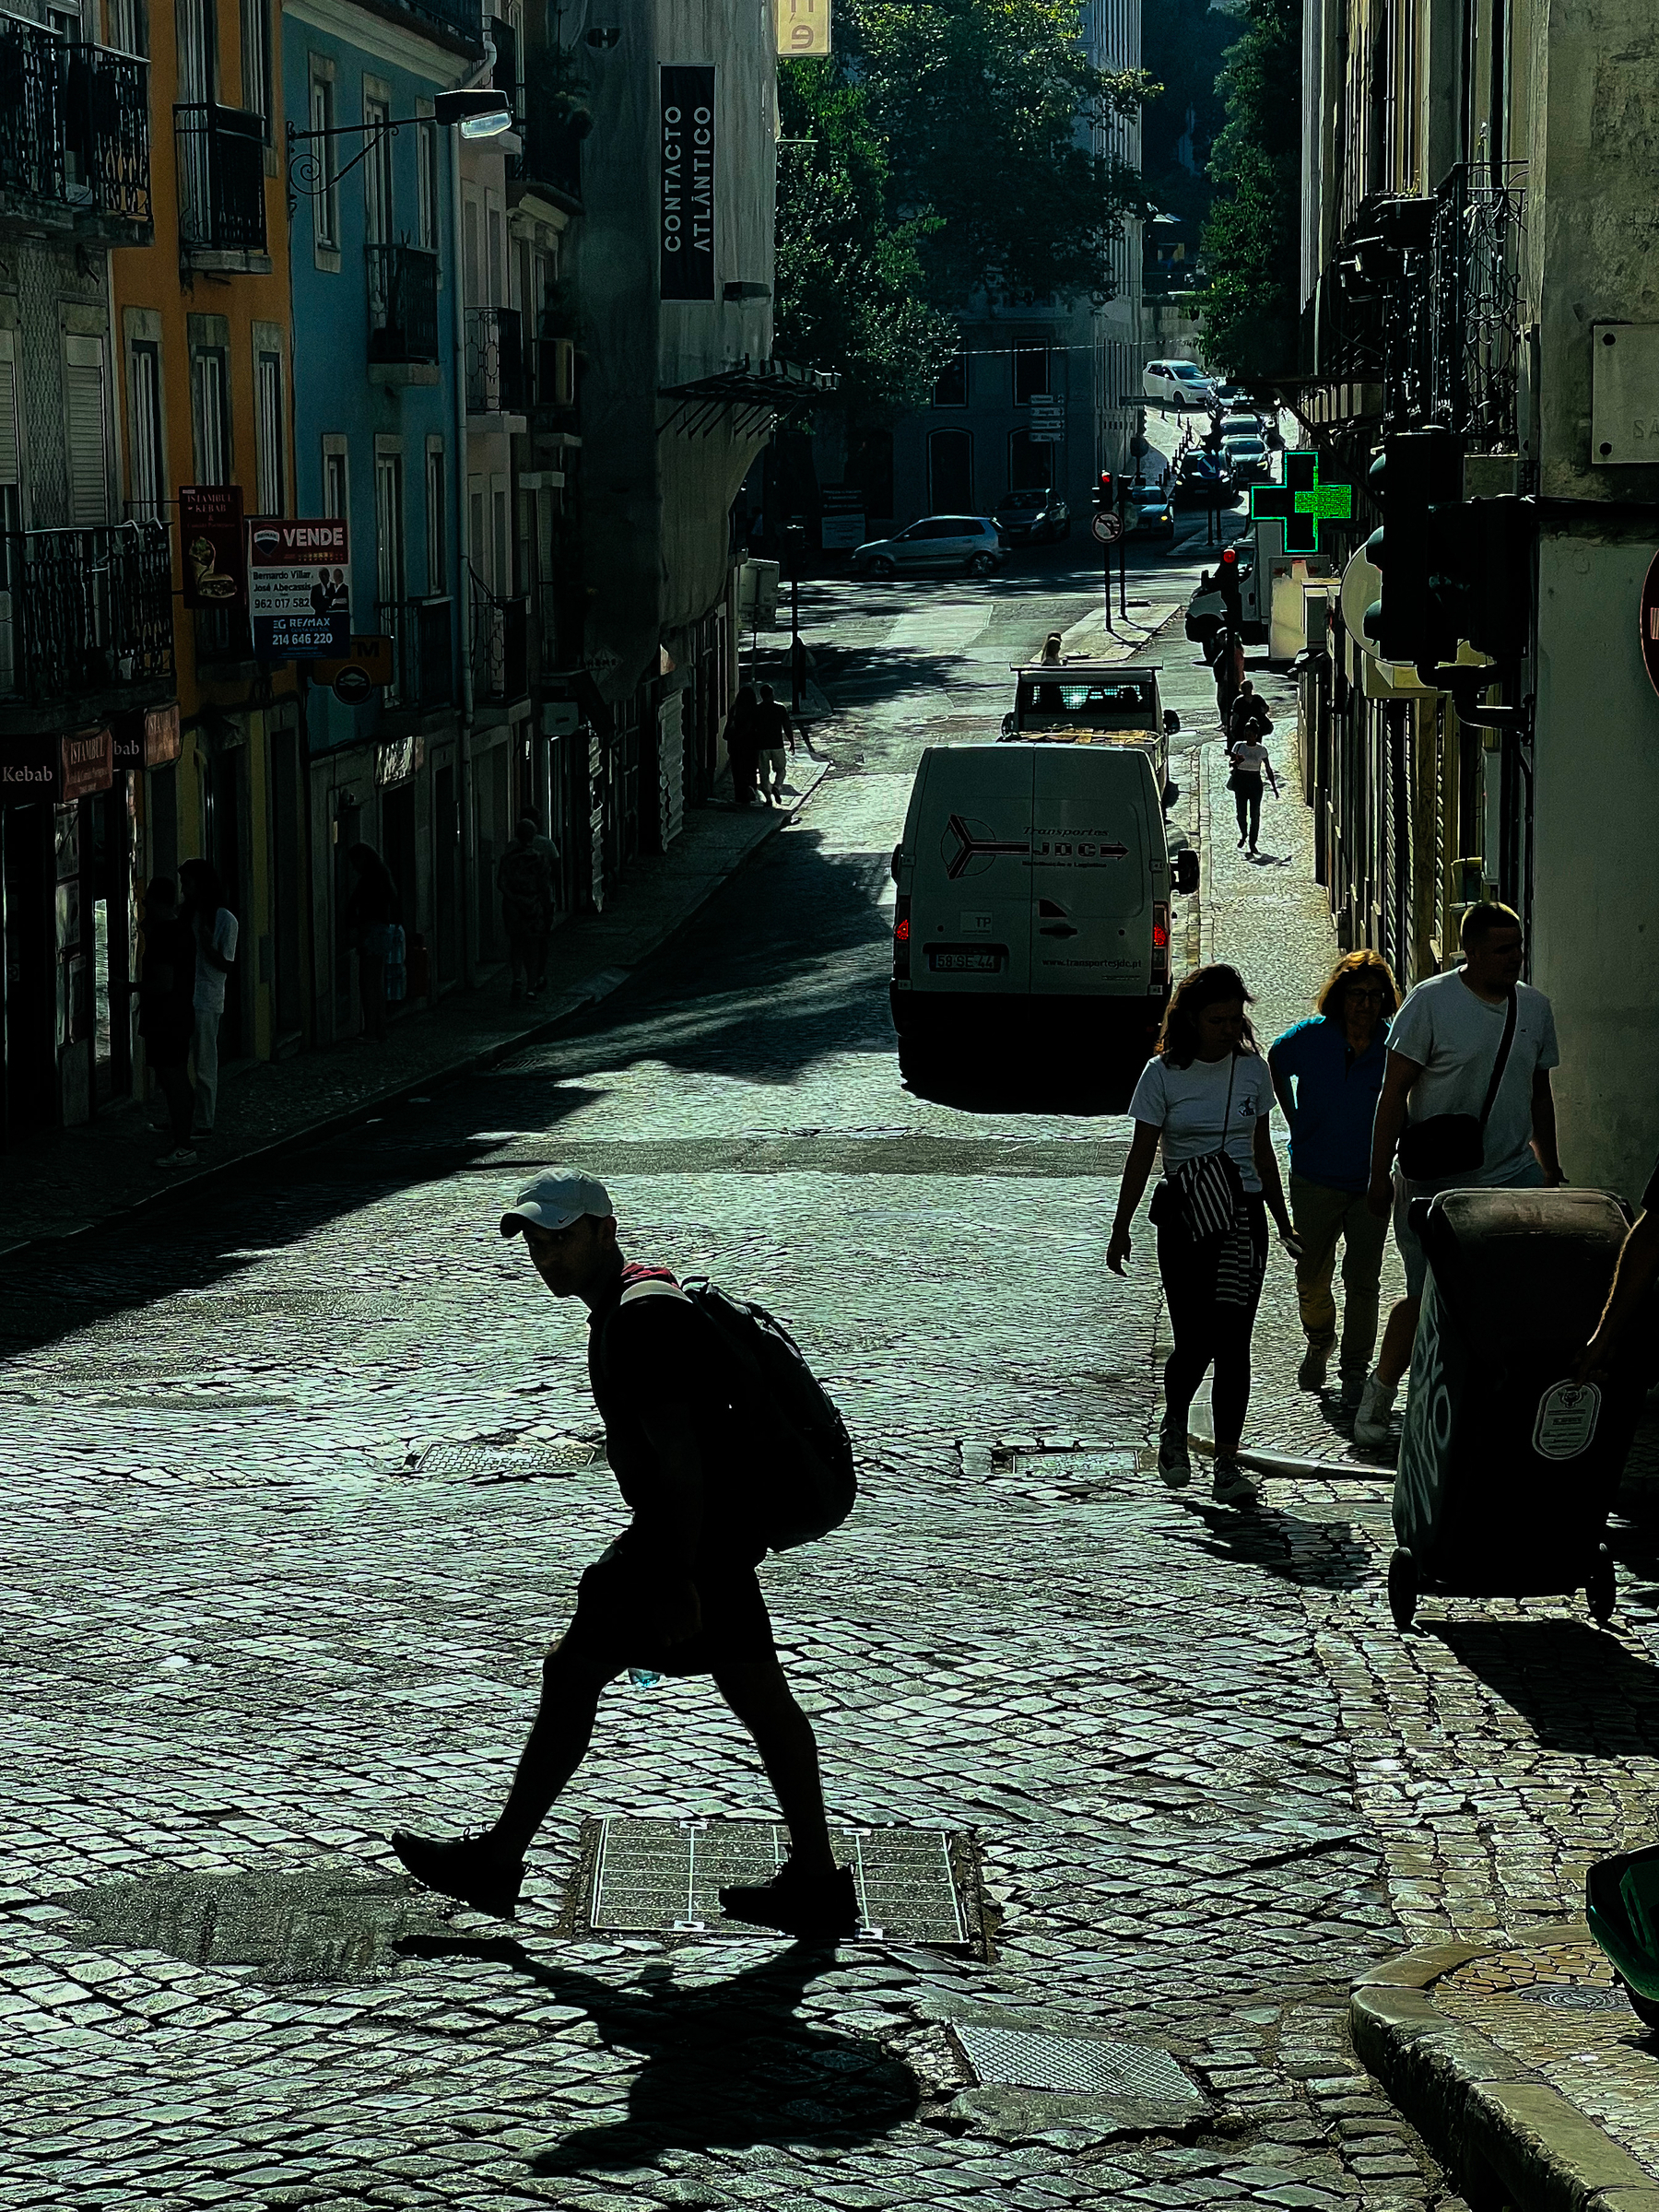 A man crosses a city street, dramatic backlight. Old part of town. 